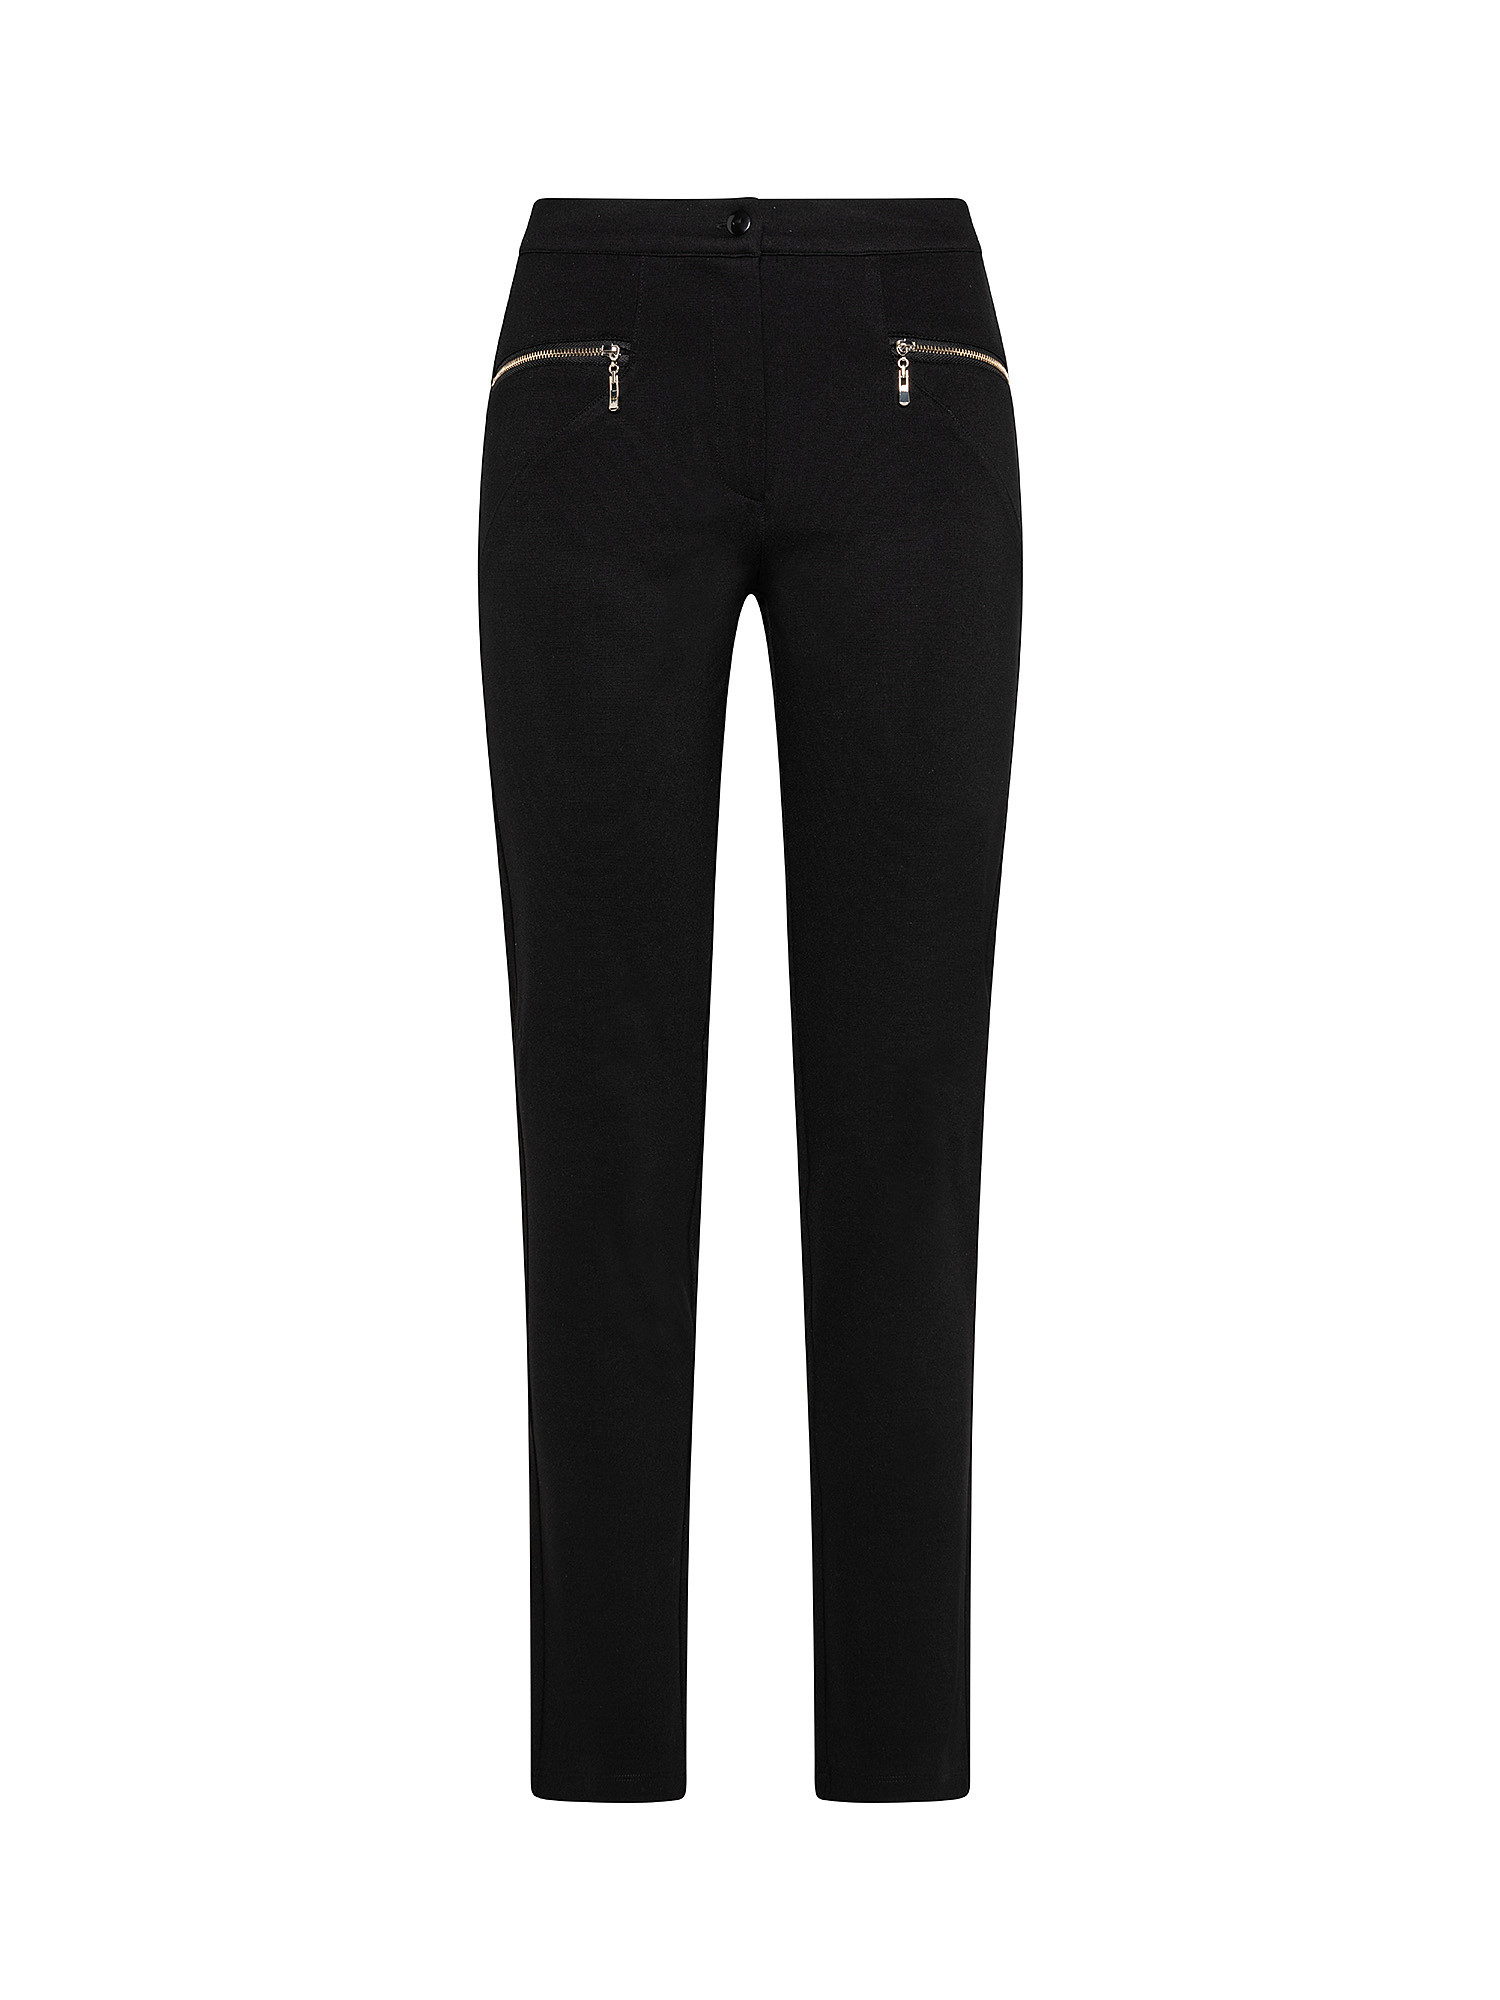 Trousers with pockets, Black, large image number 0